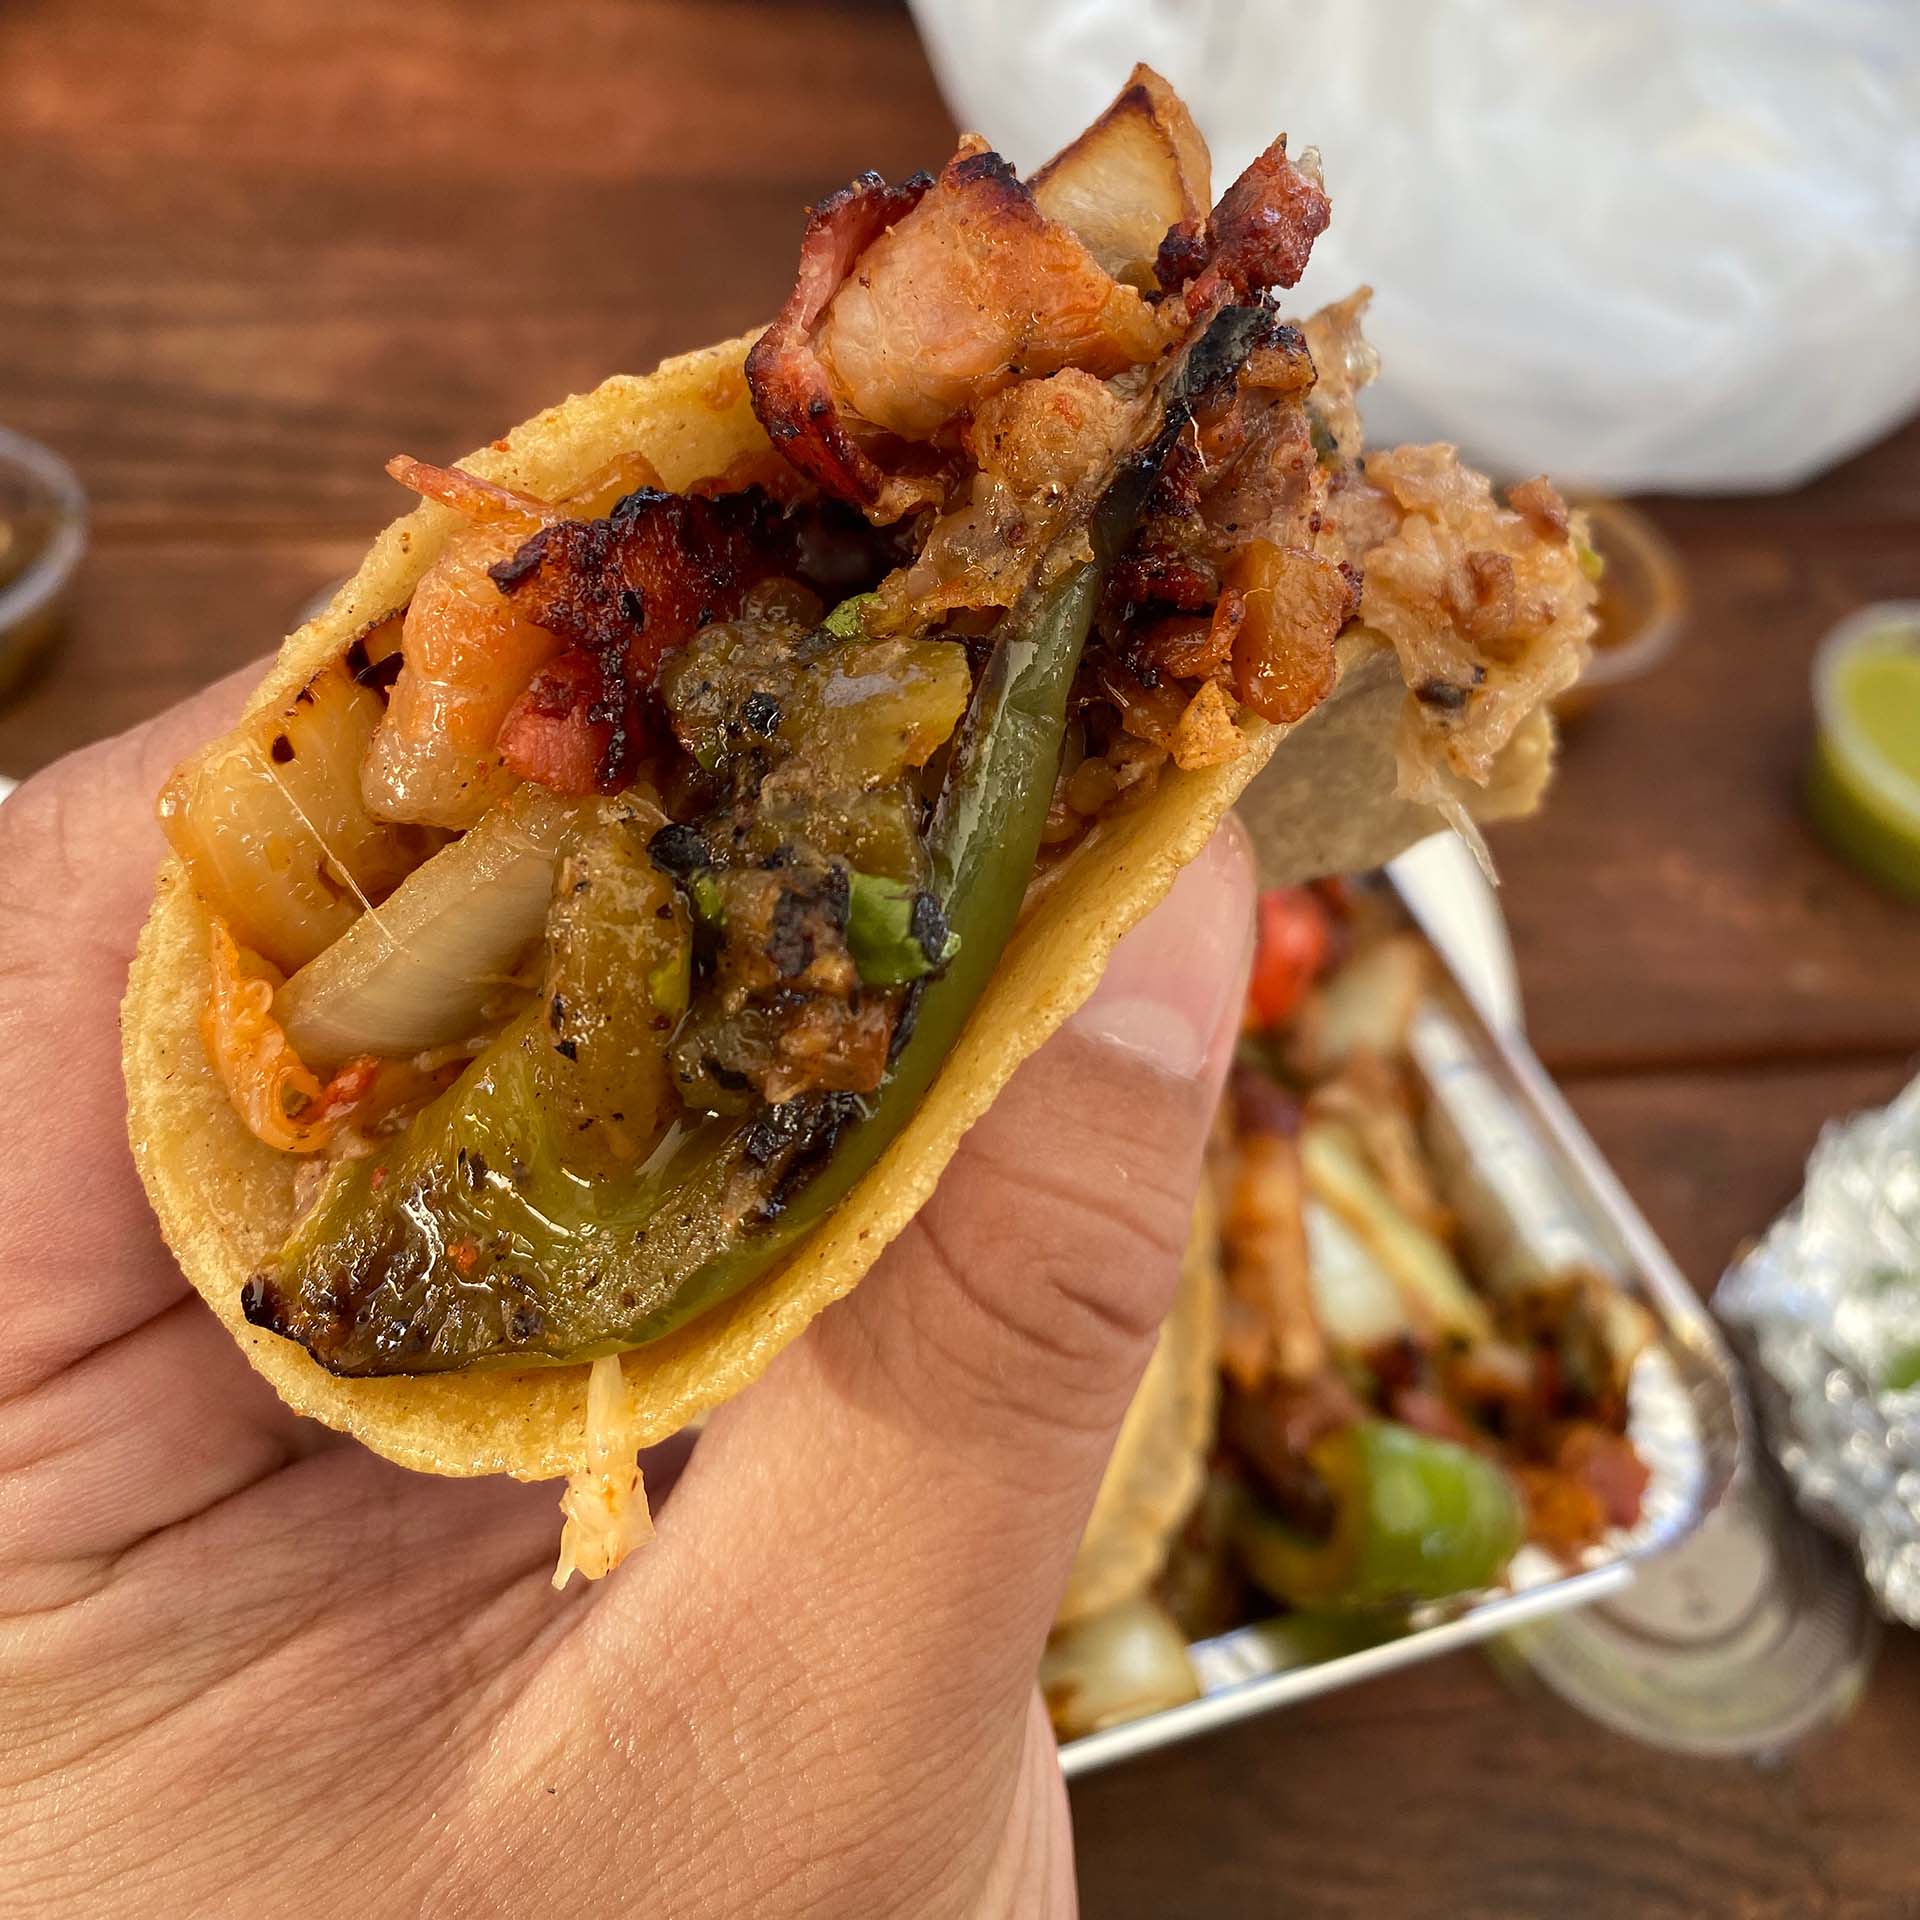 A hand holding a taco stuffed with cheesy meat, onions, and peppers.